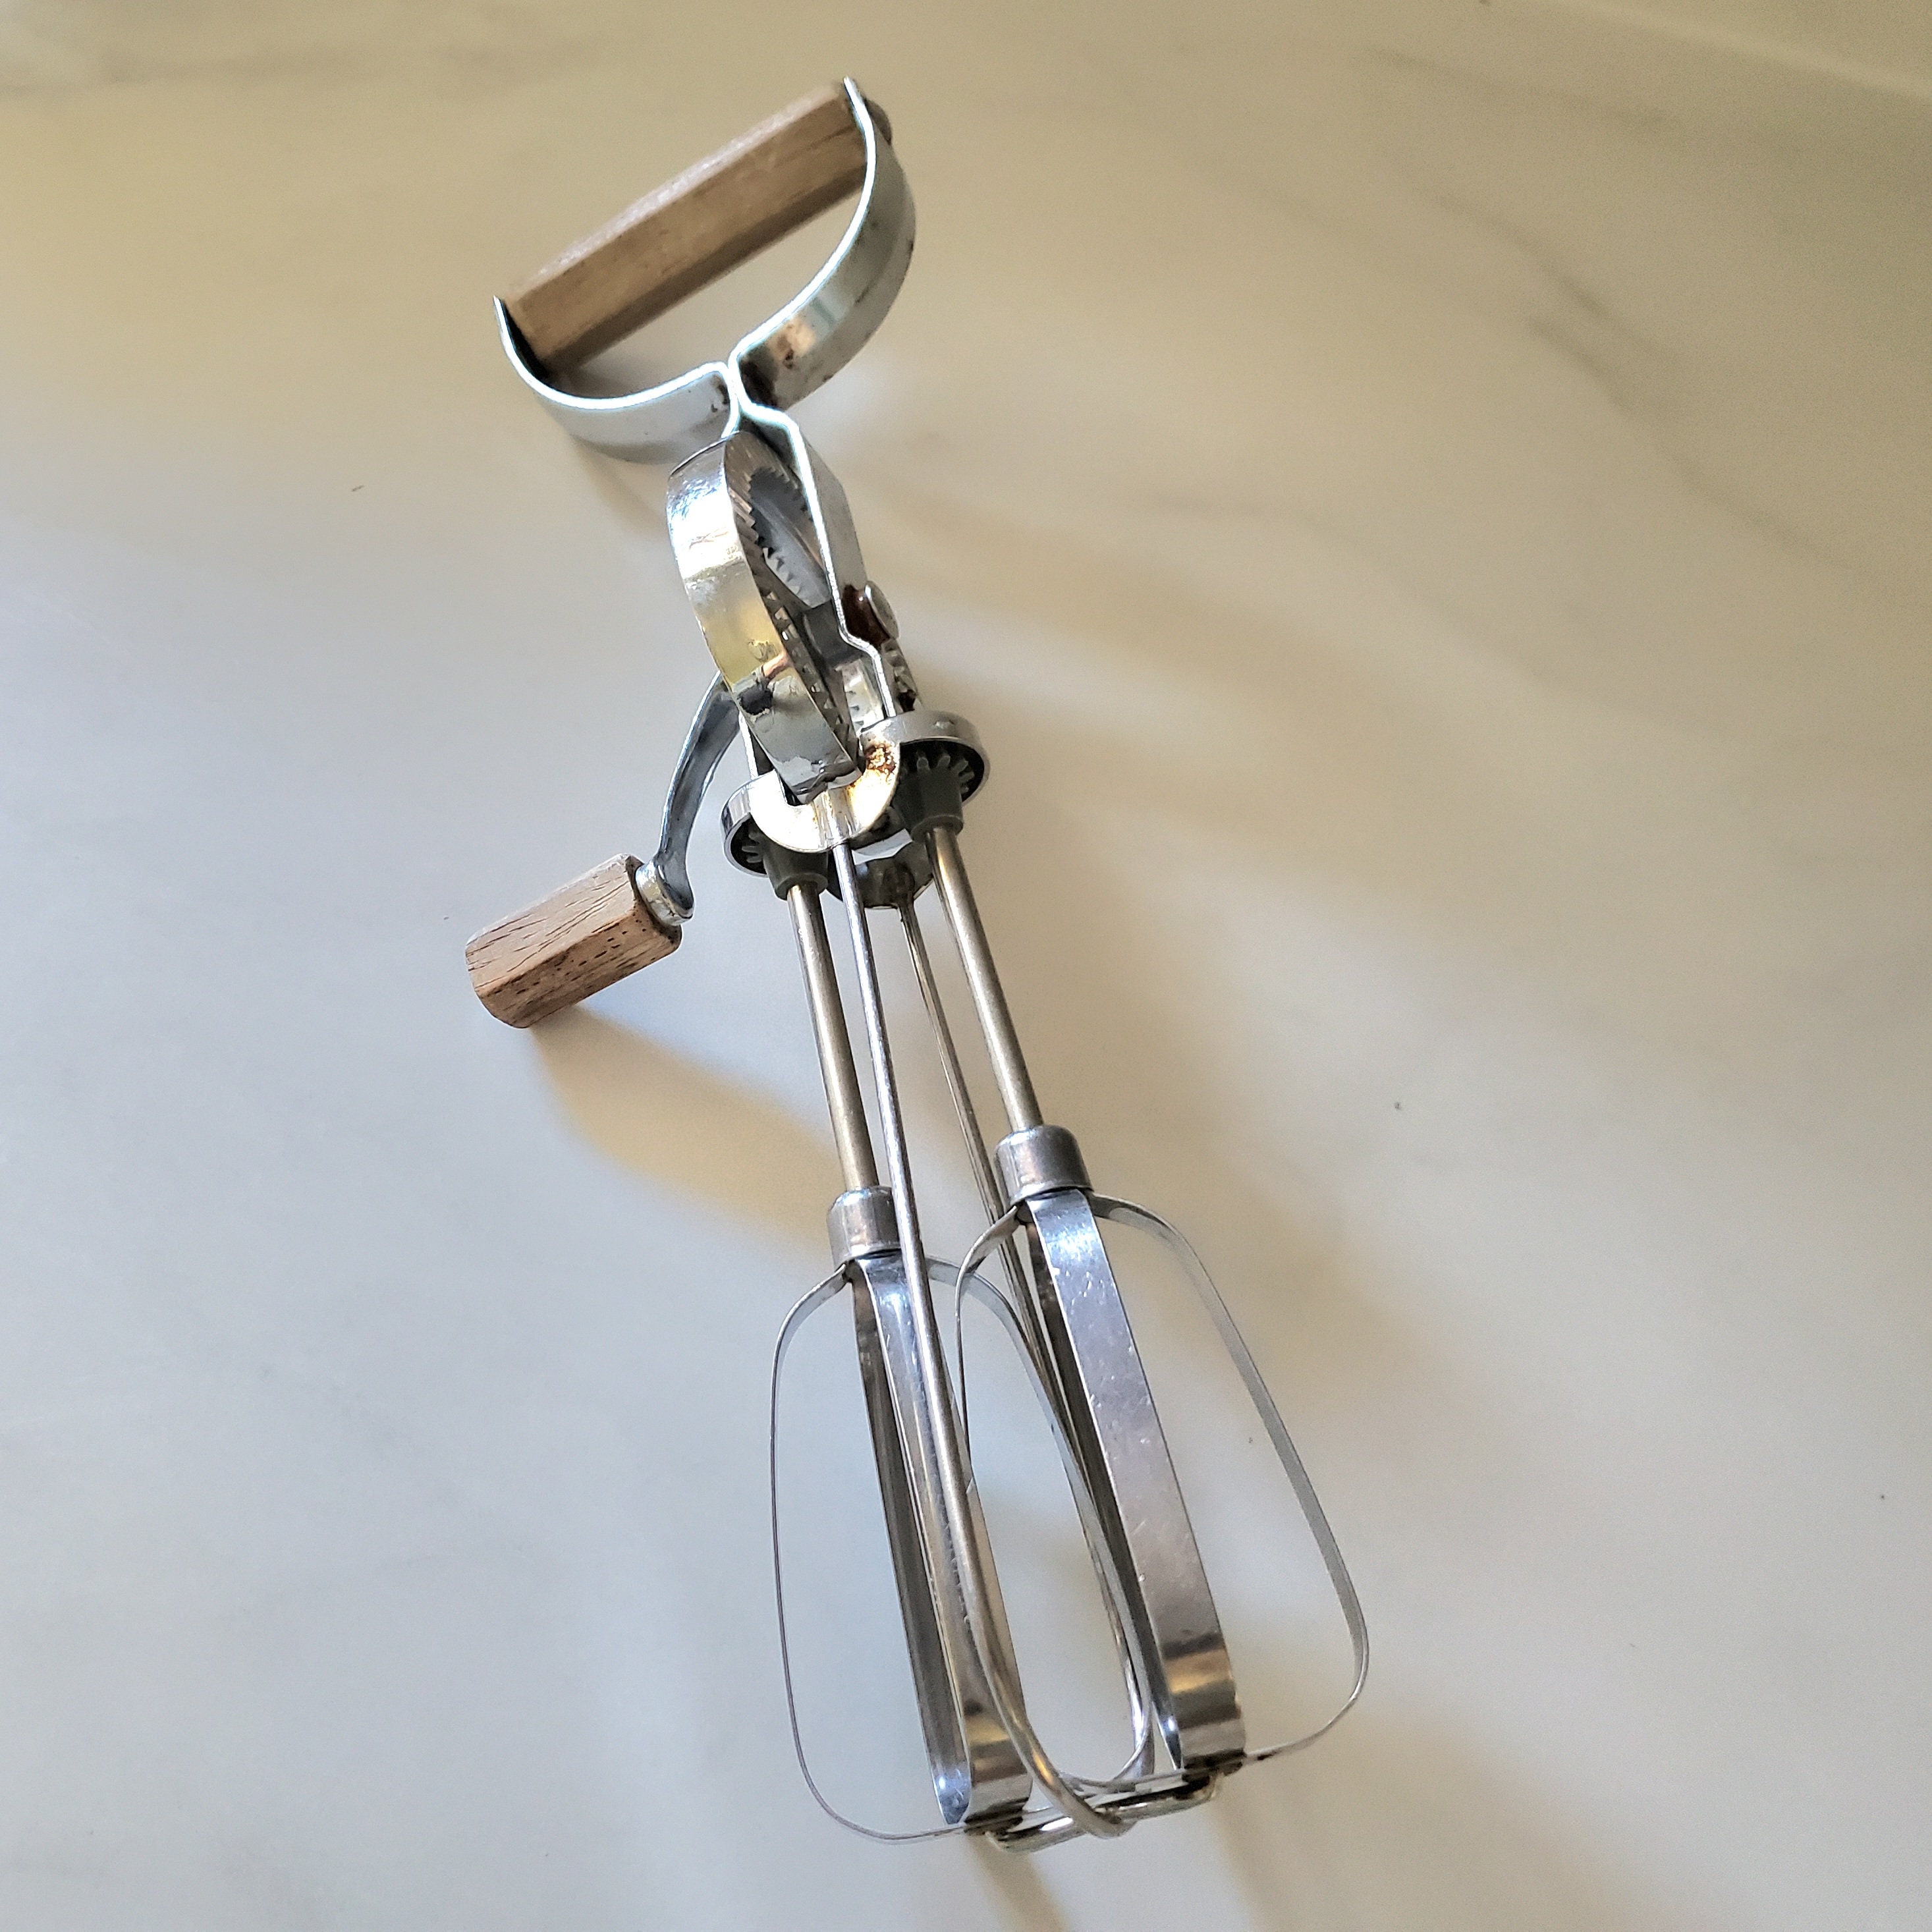 Ecko Best - Vintage Stainless Steel Manual Hand Mixer - Egg Beater